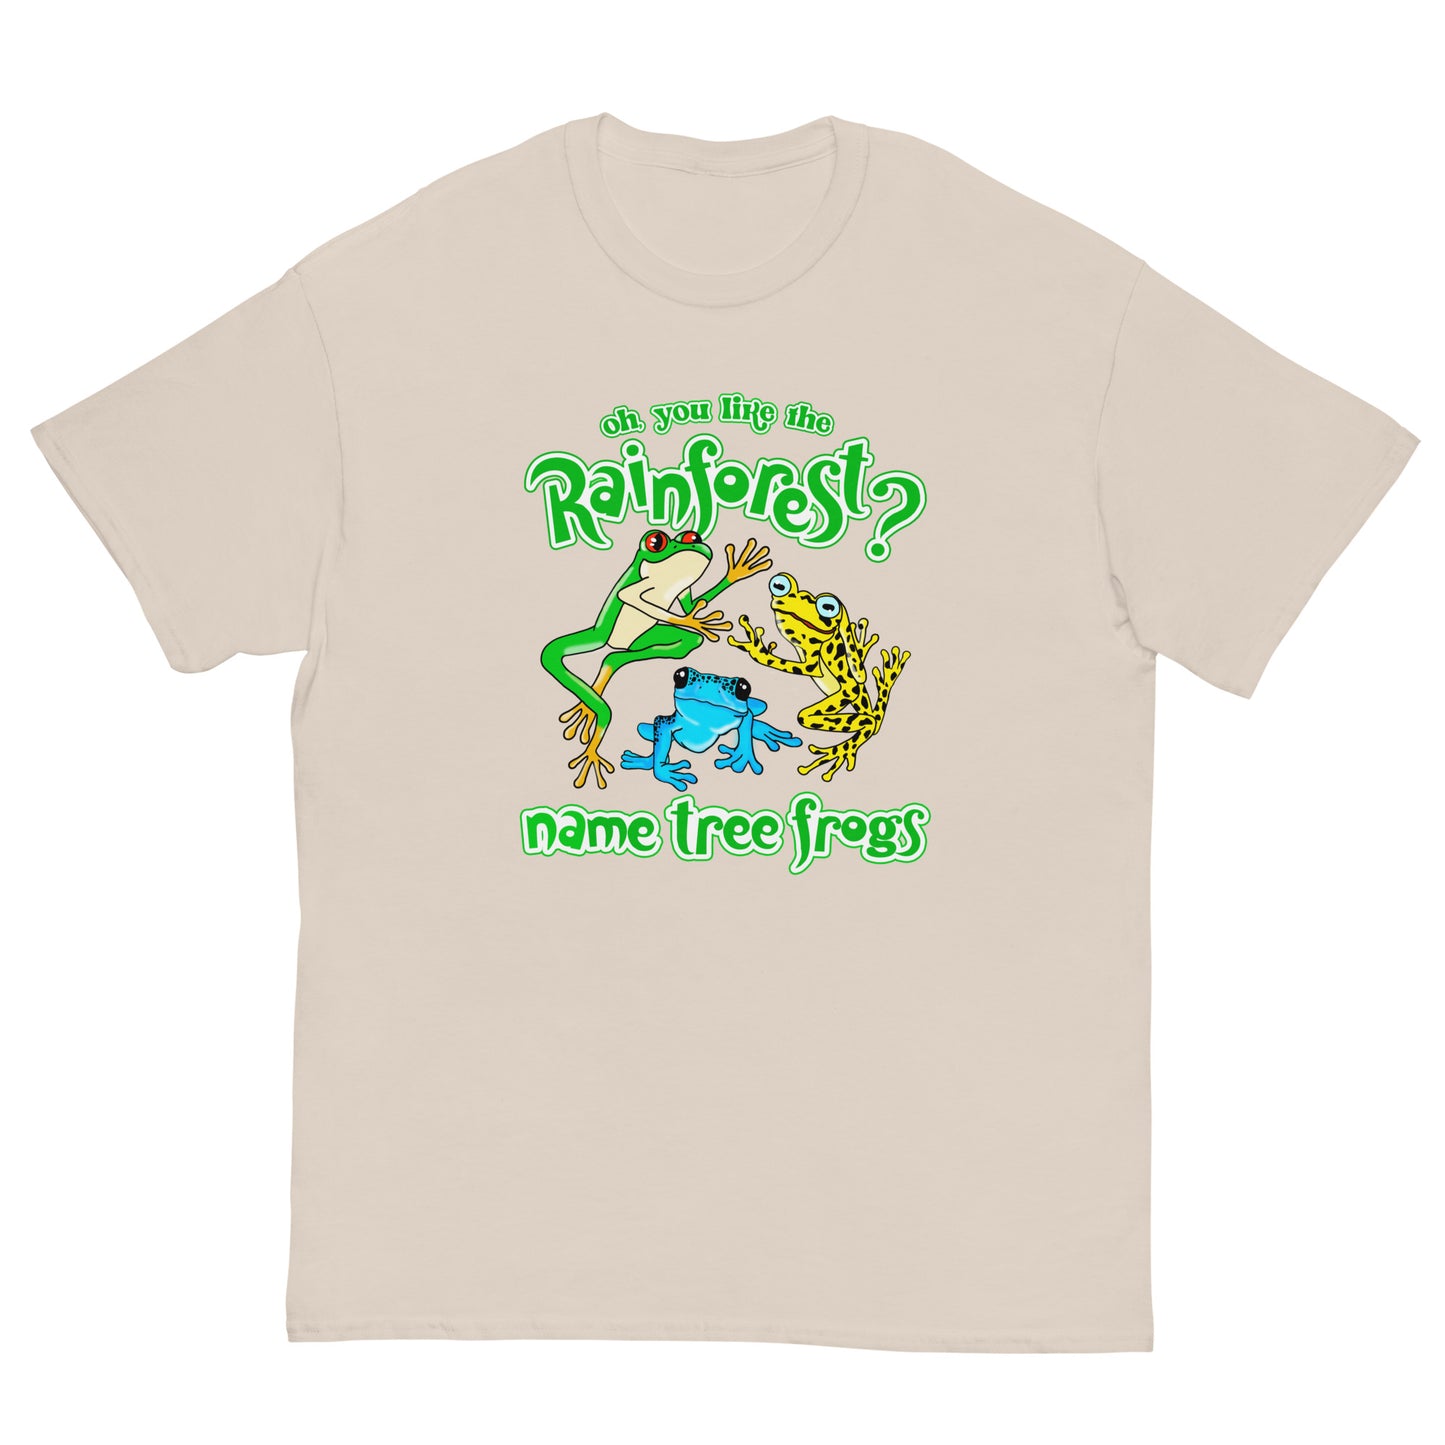 Do You Like The Rainforest? Name Tree Frogs.